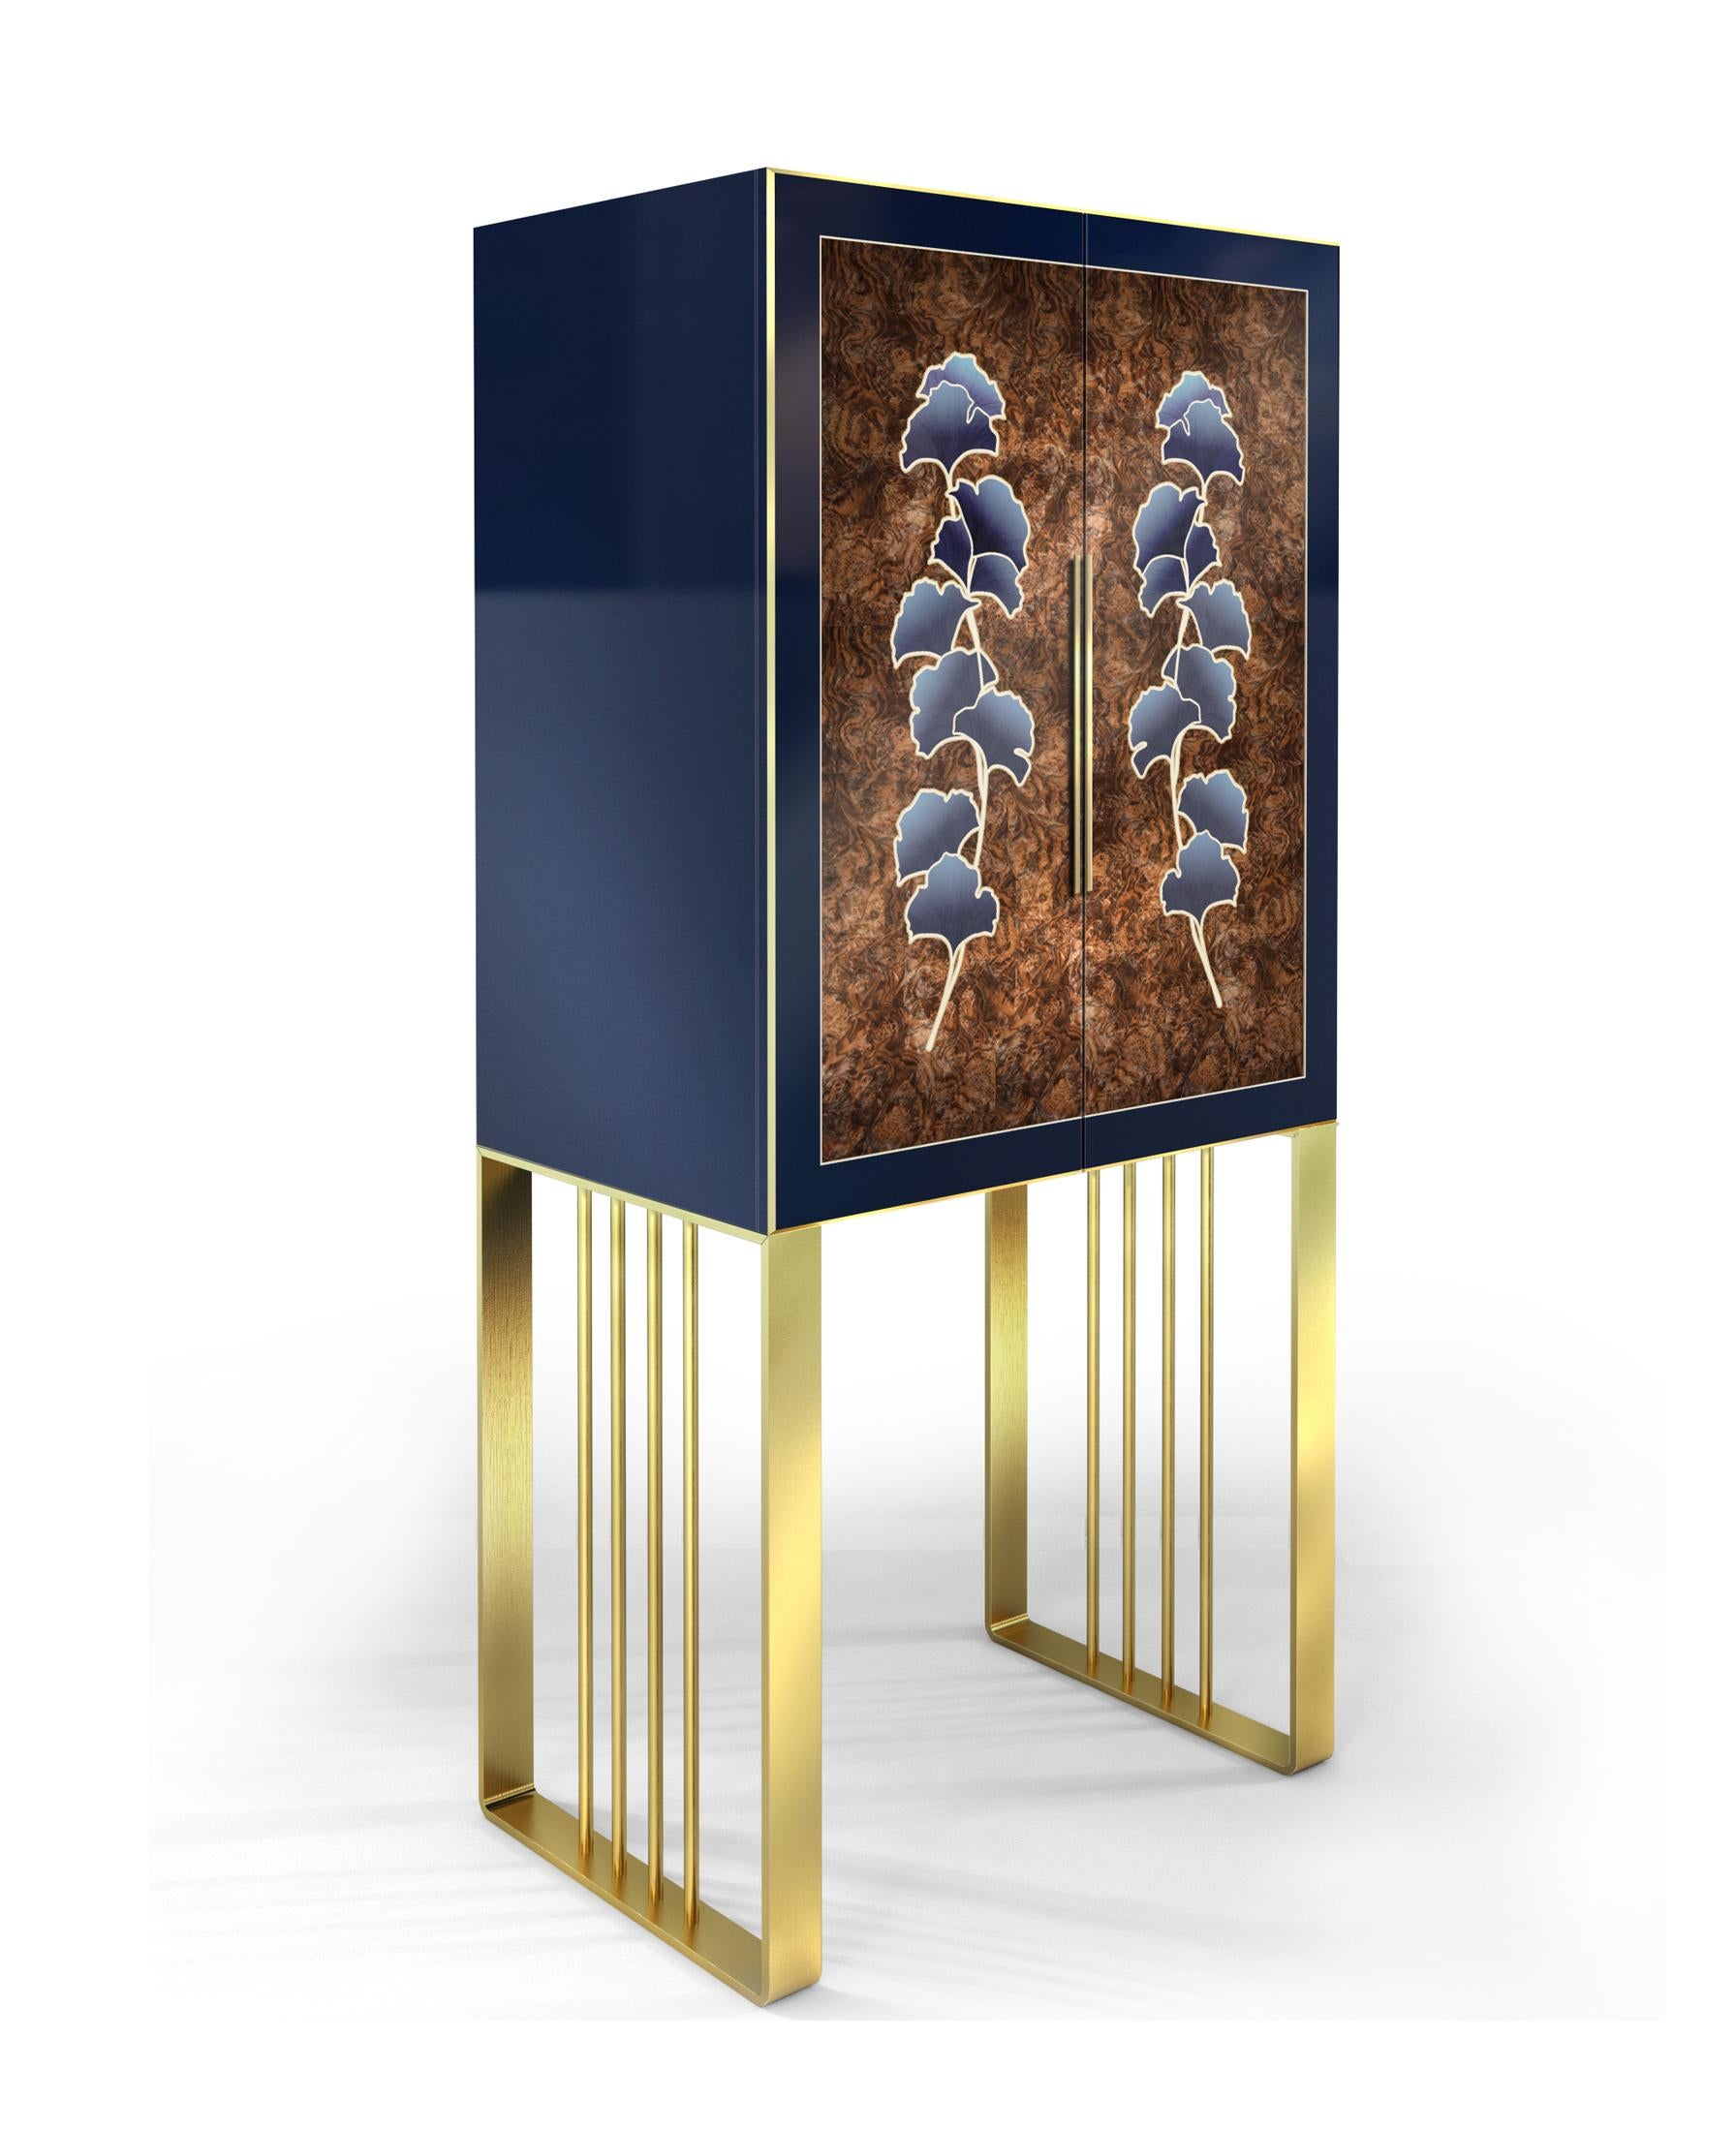 This elegant drinks cabinet is handcrafted in satin navy blue lacquer finish, rich in texture burl walnut and supported with intricate brushed brass legs. The hand-dyed English oak marquetry creates a Ginkgo leaf motif which symbolizes hope and